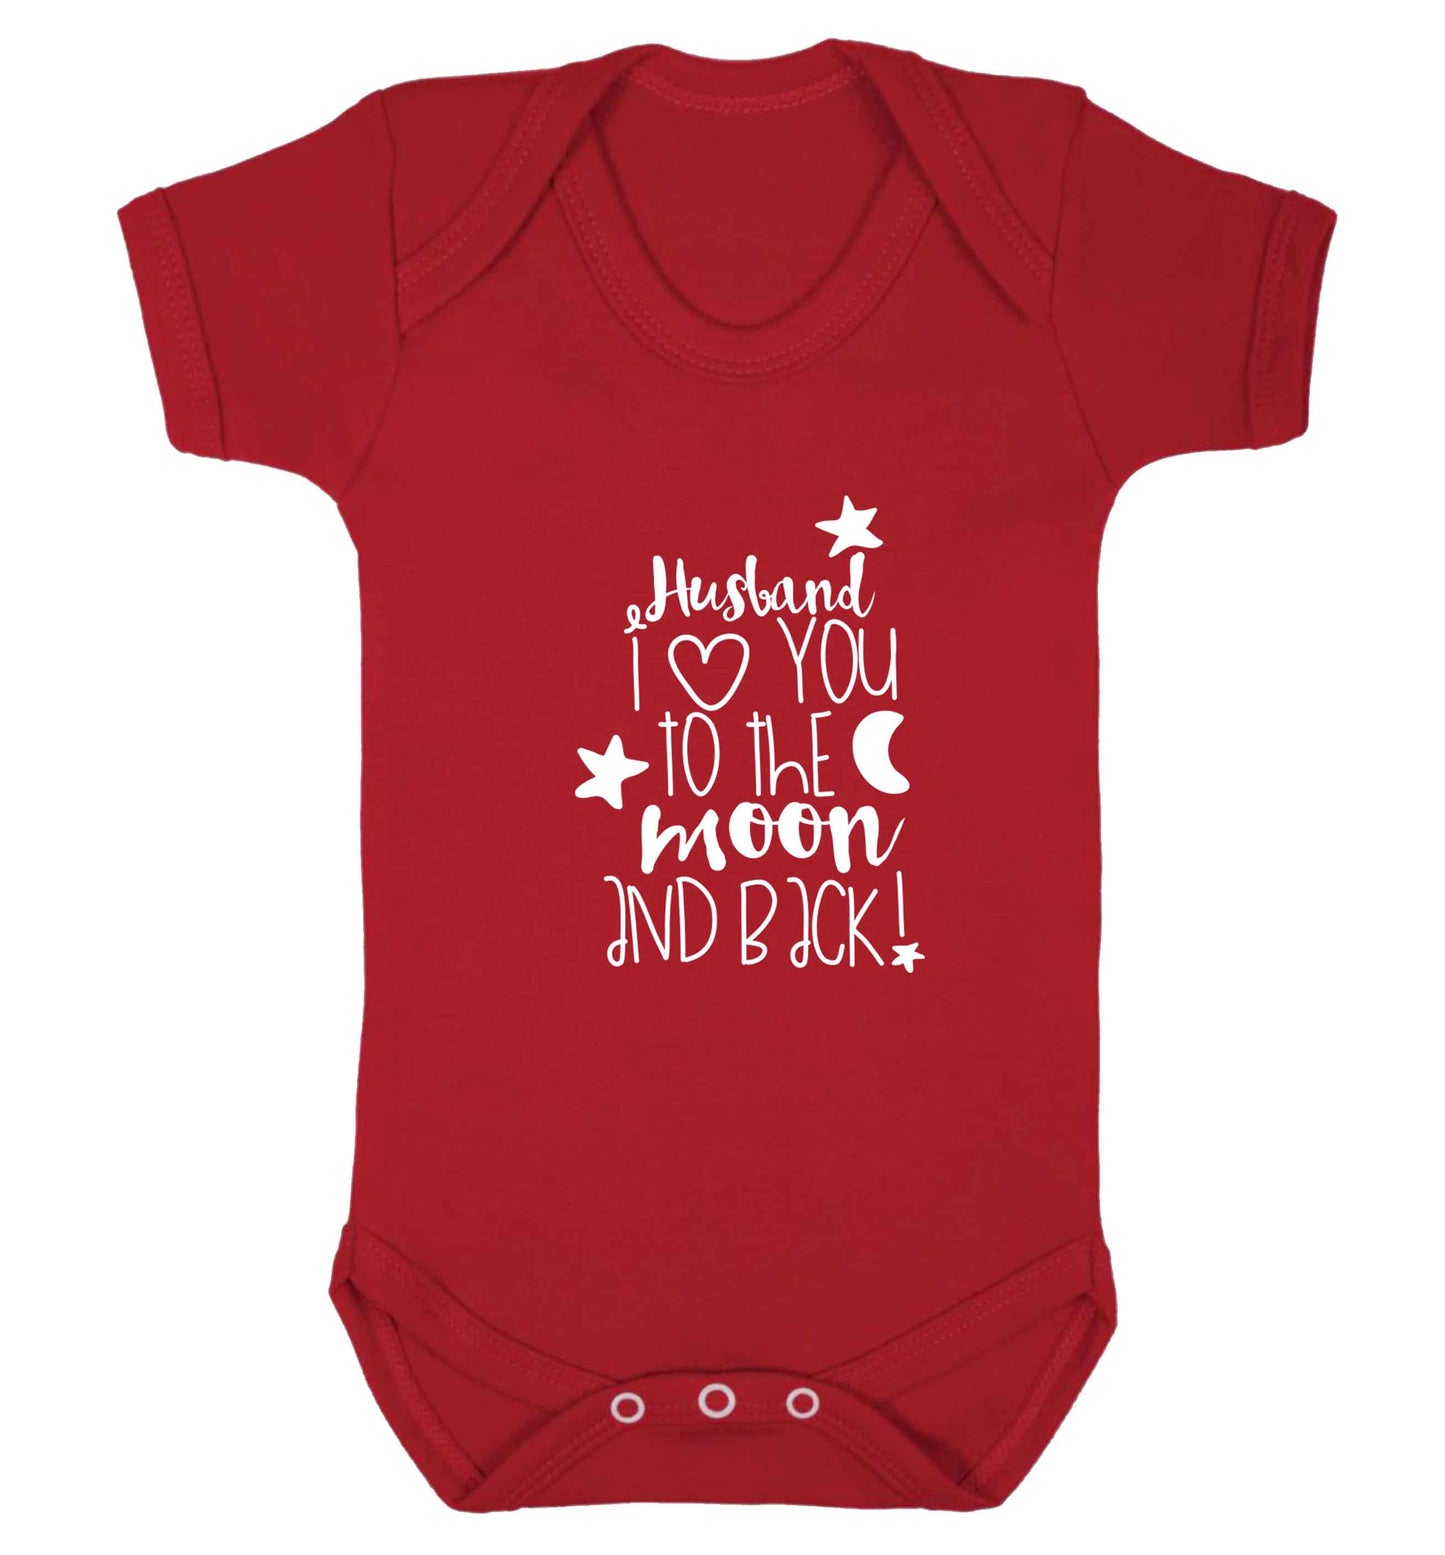 Husband I love you to the moon and back baby vest red 18-24 months